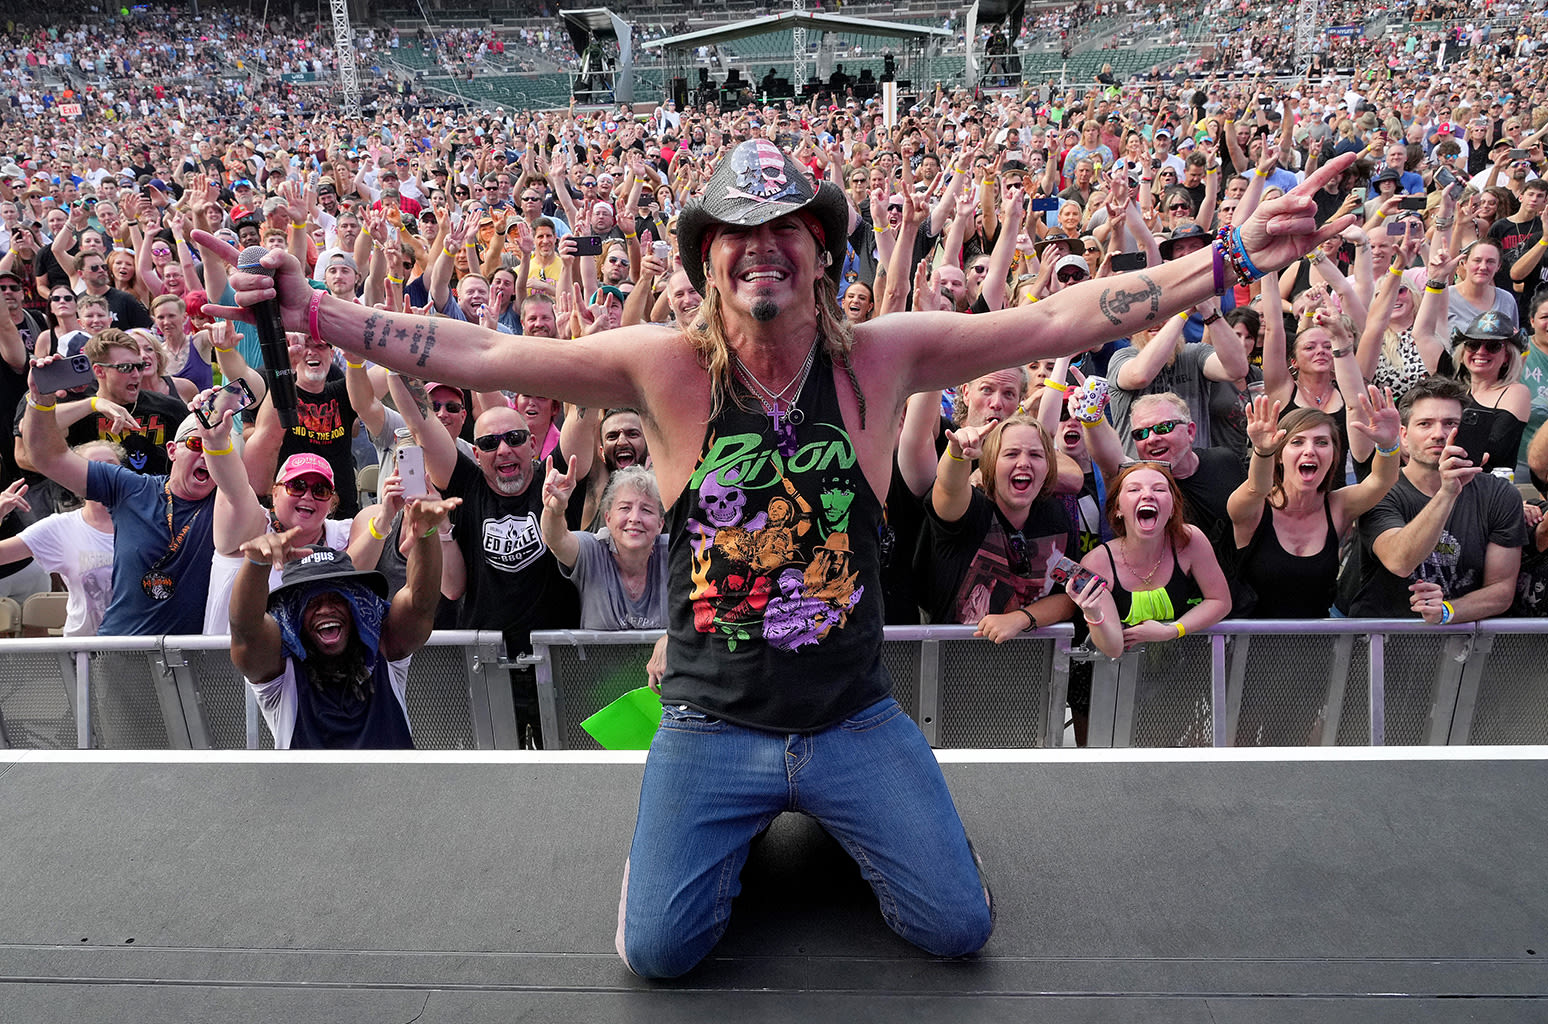 How to Watch & Stream A&E’s ‘Biography: Bret Michaels’ for Free Online